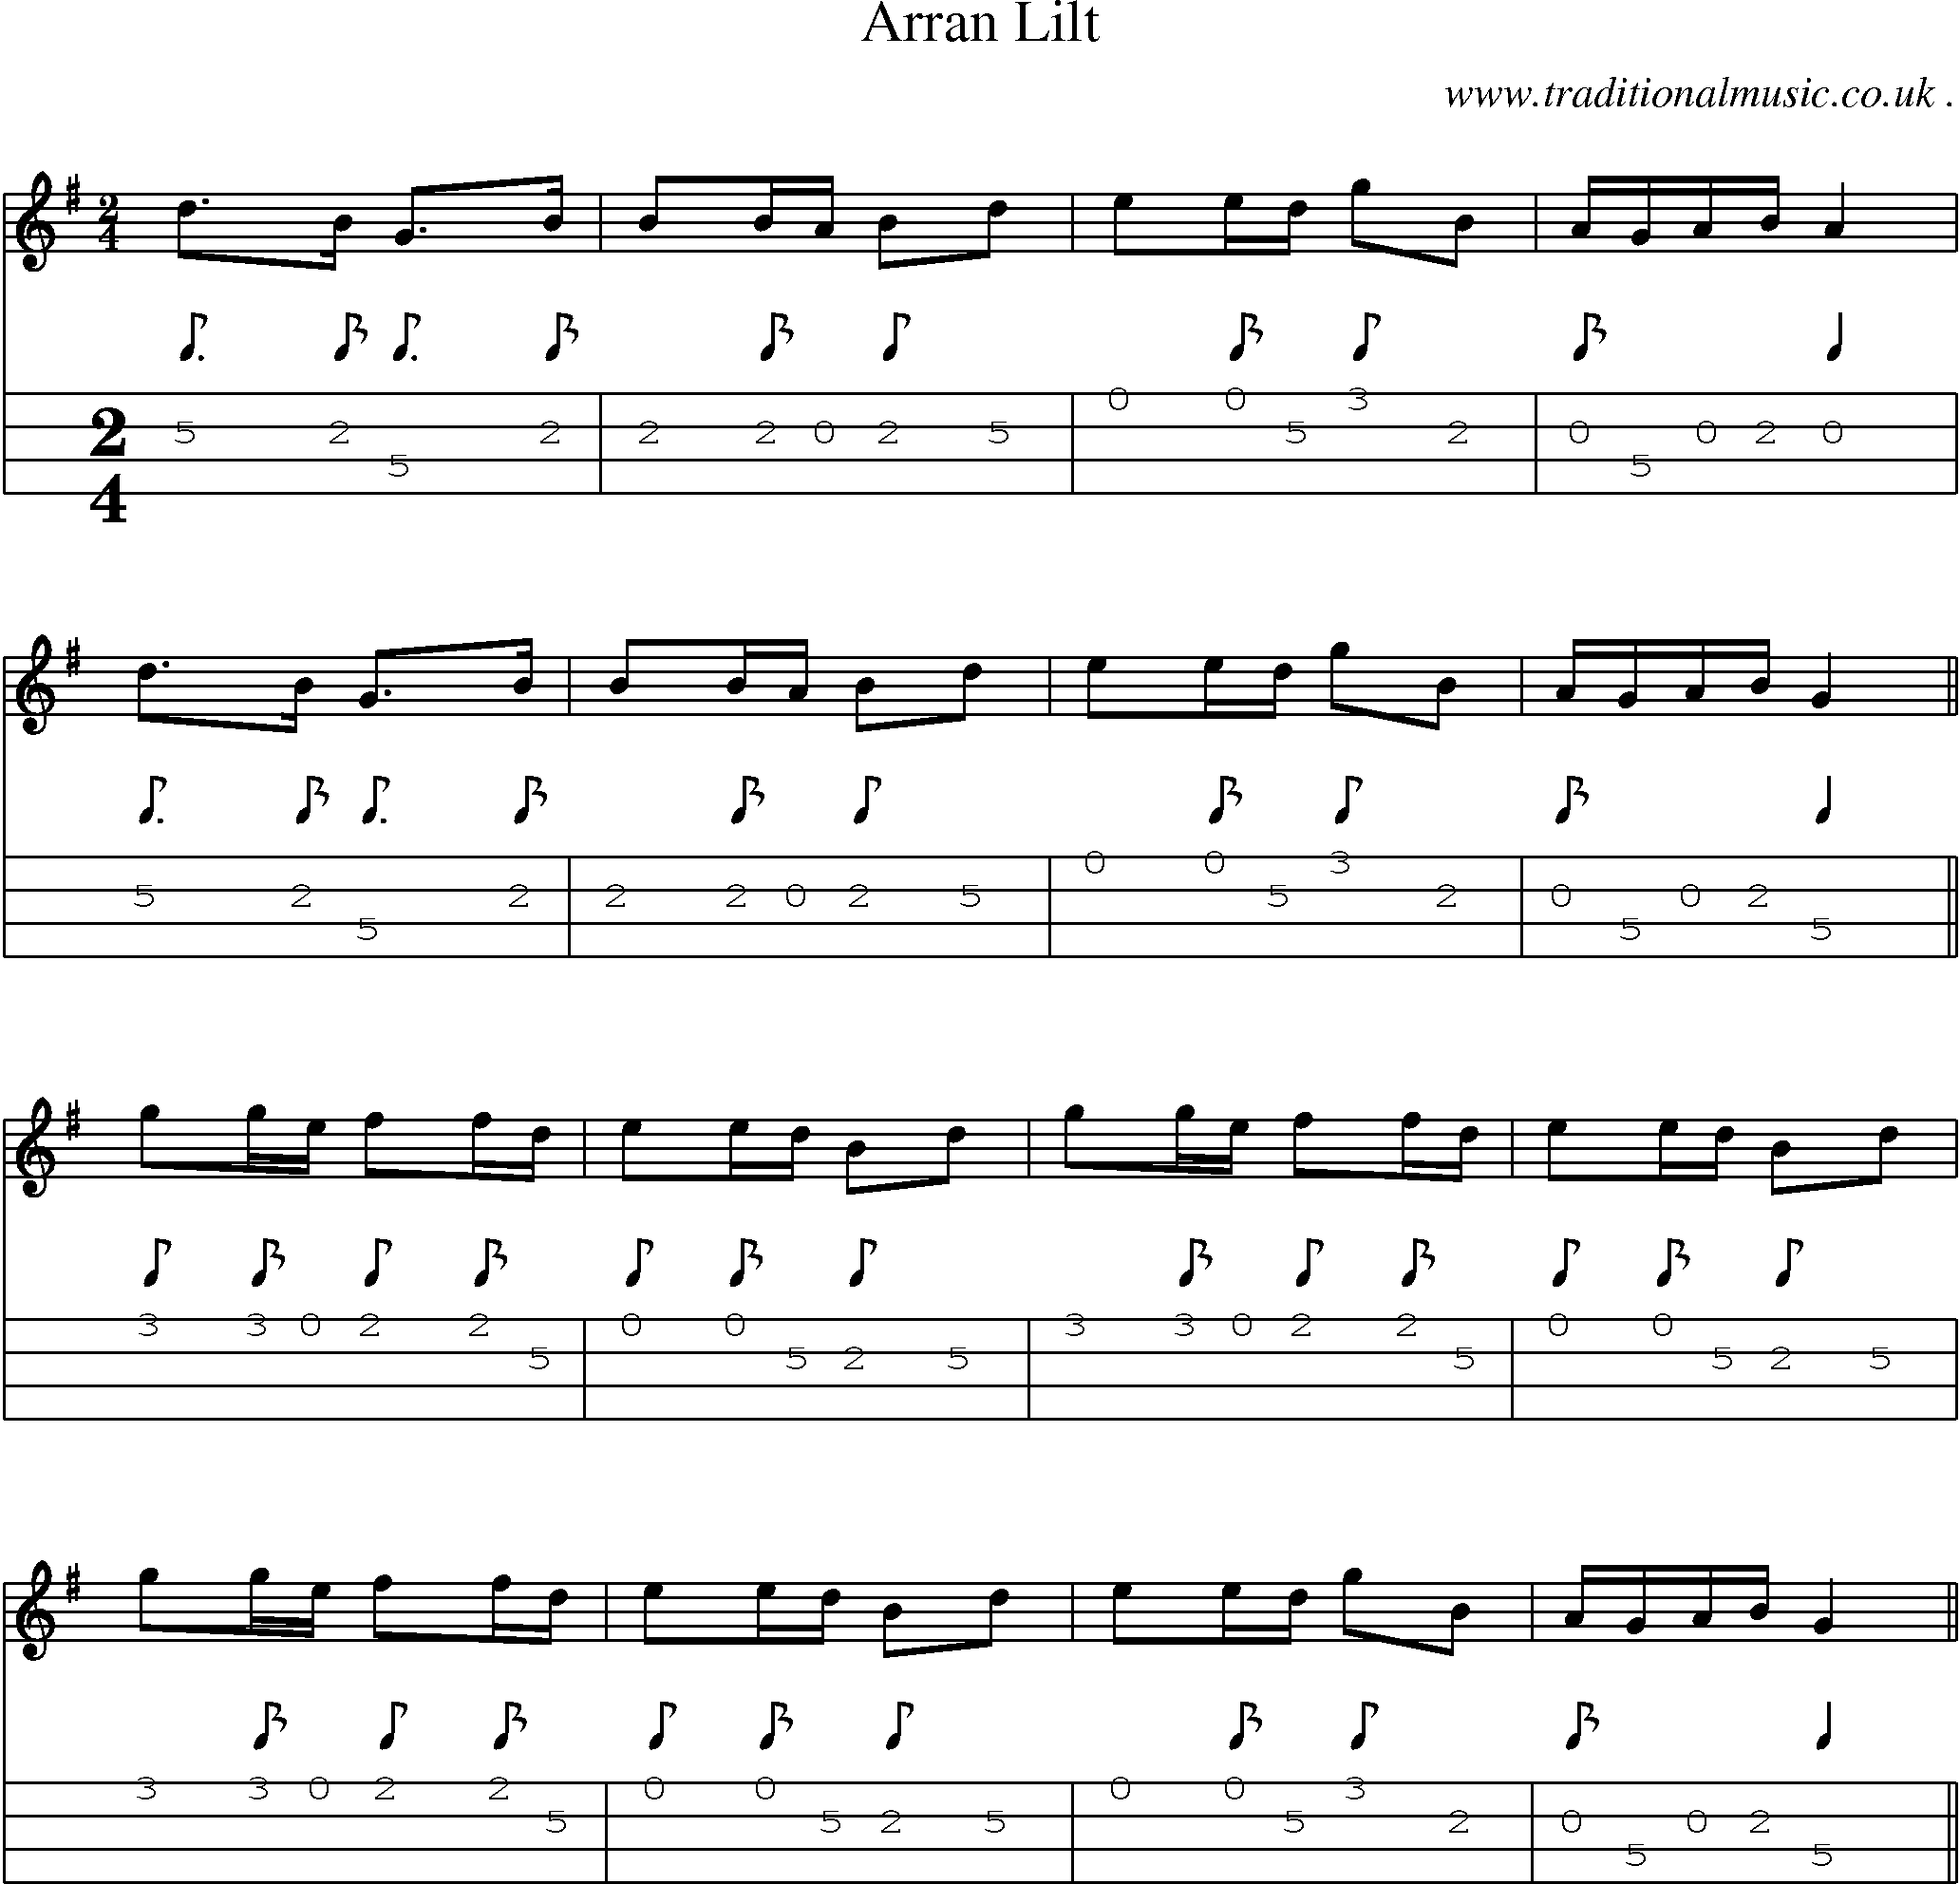 Sheet-music  score, Chords and Mandolin Tabs for Arran Lilt